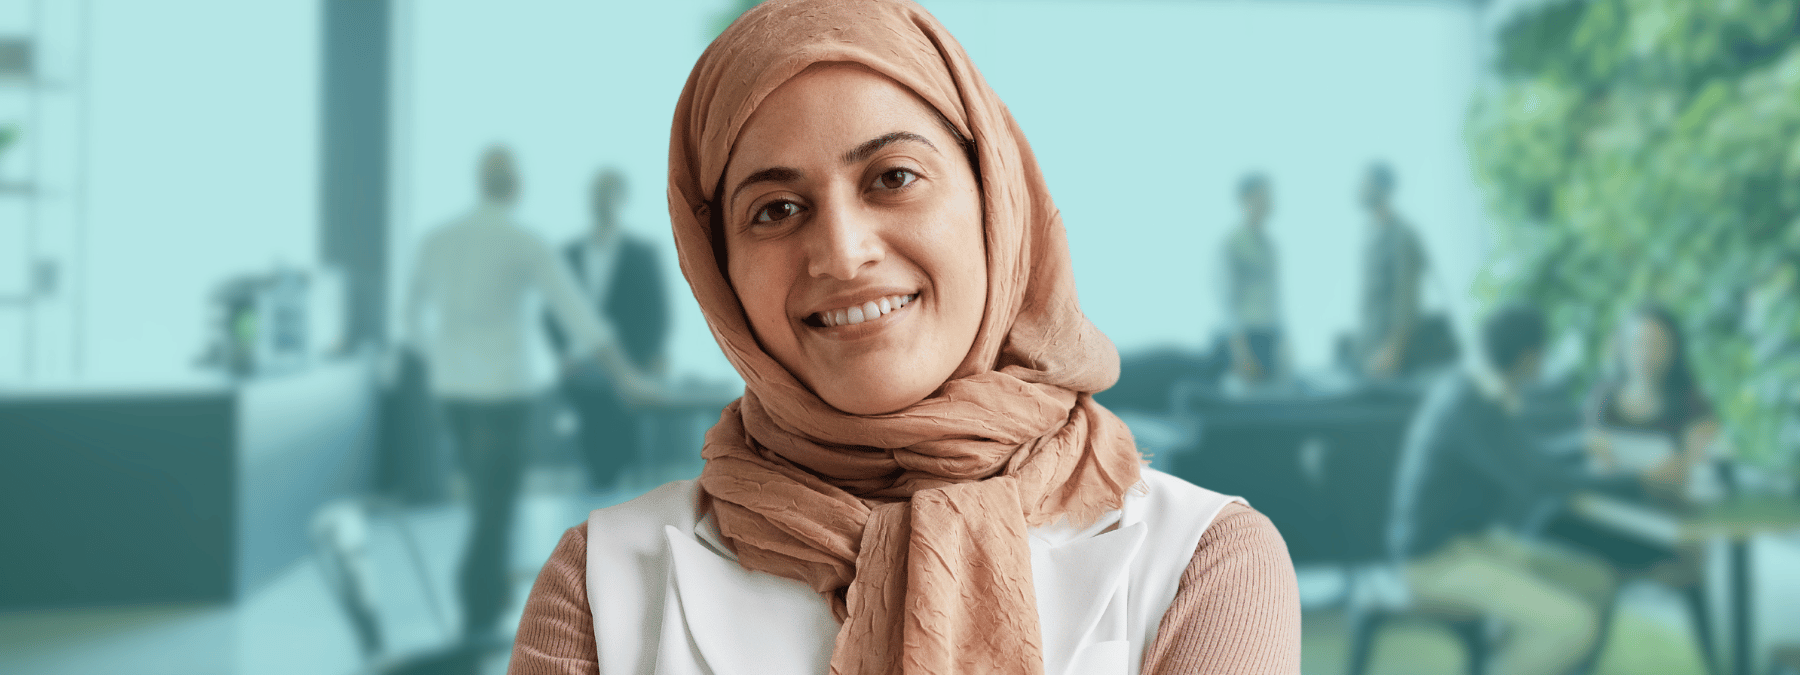 Woman wearing a hijab with a background of an office environment